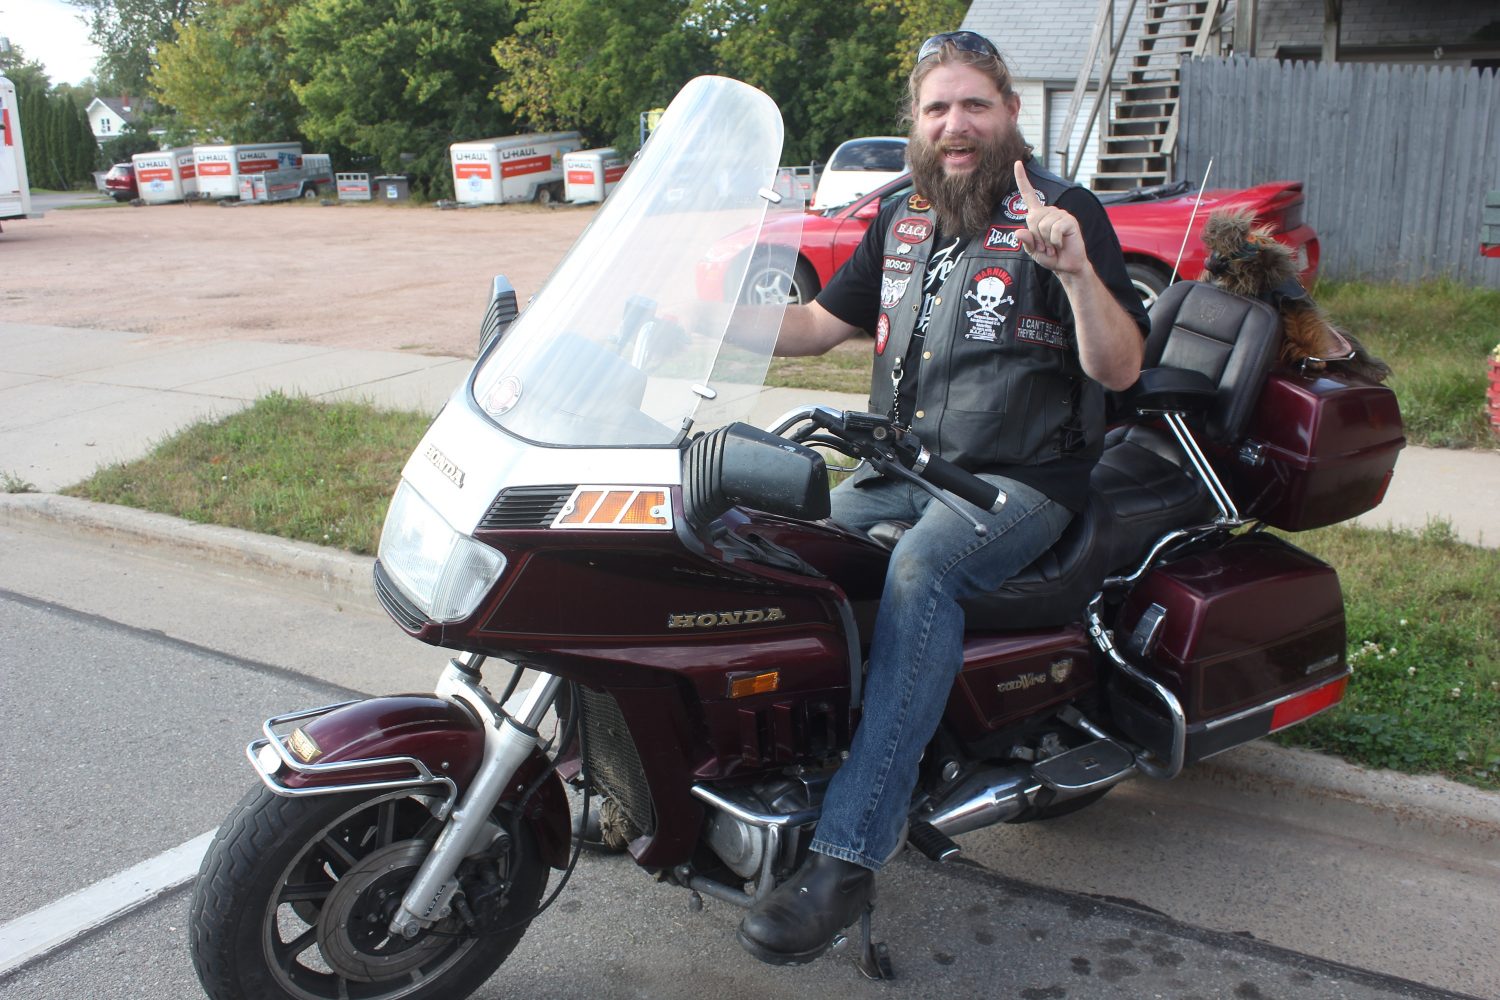 Local biker leads ride to benefit abused children